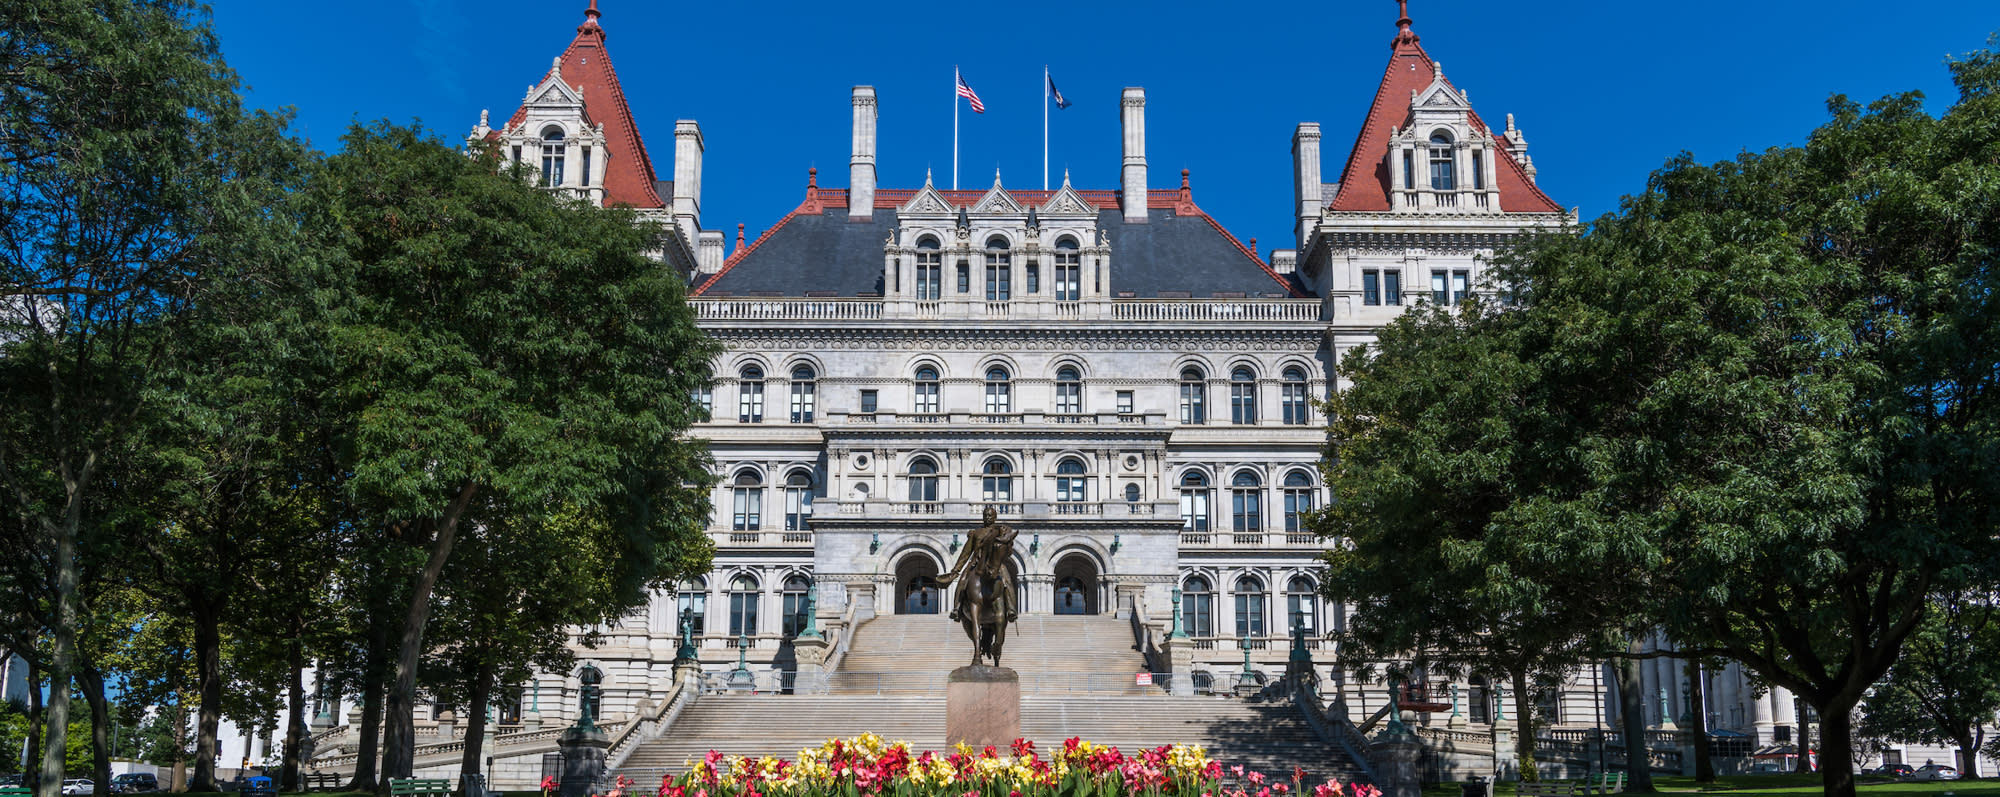 A photo of the exterior of the New York State Capitol building in Albany